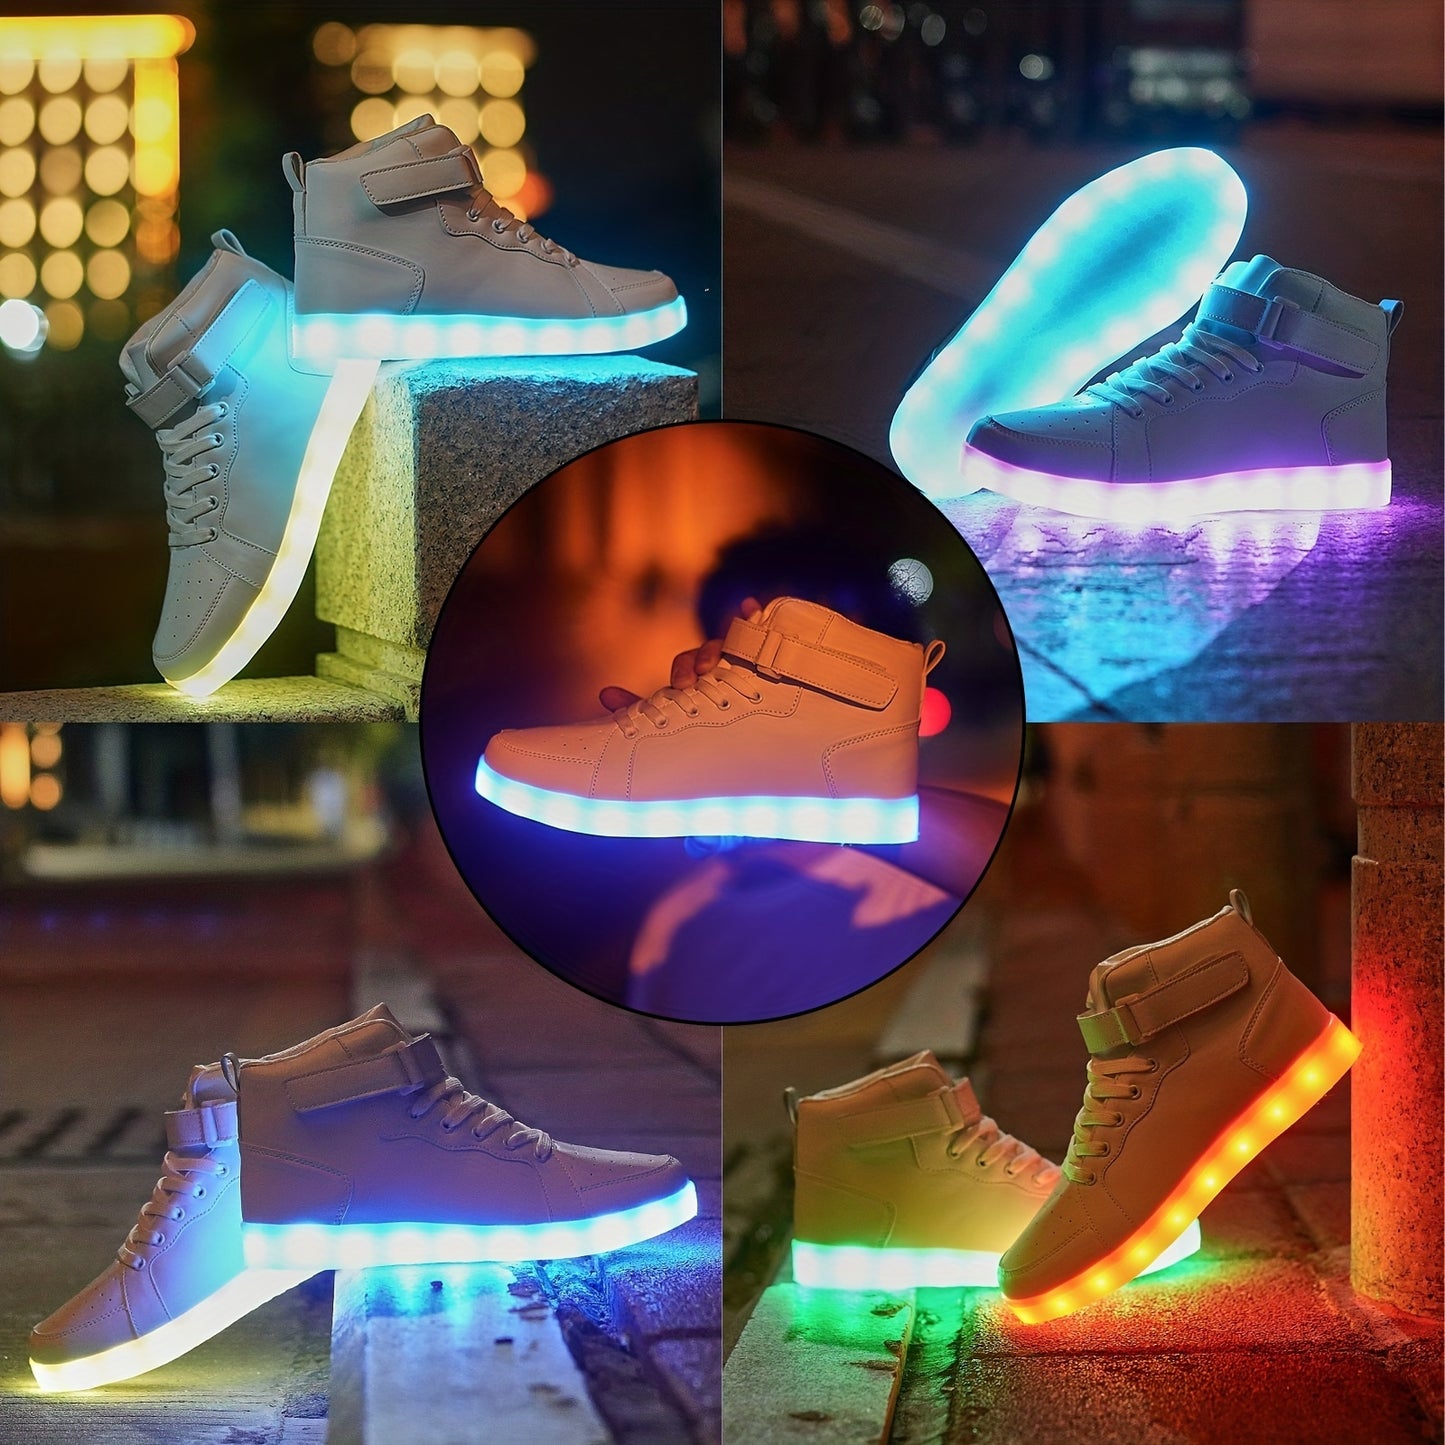 Trendy Led Light Up HighTop Sneakers, USB Charging